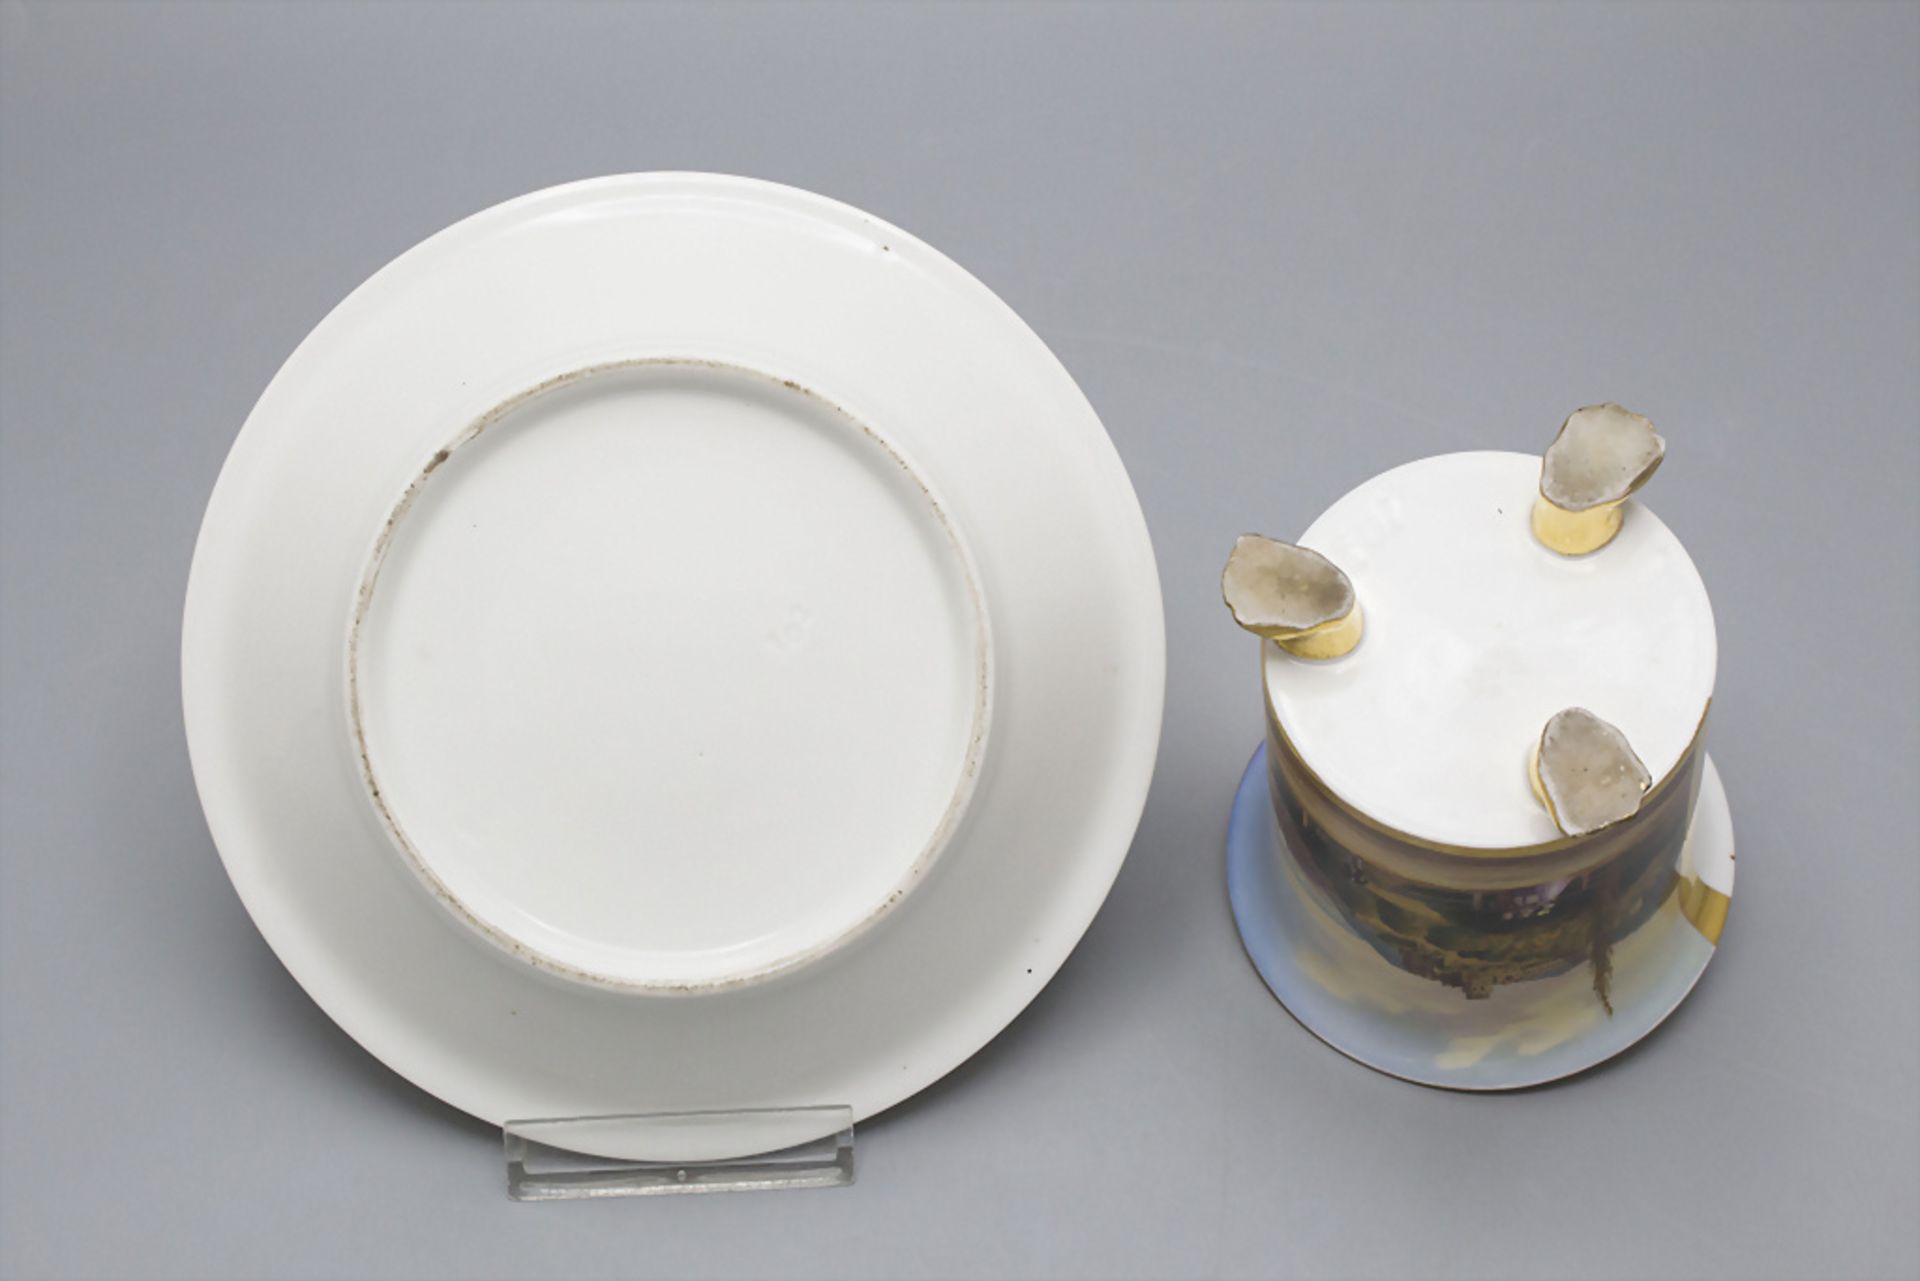 Ansichtentasse mit Untertasse 'Heidelberger Schloss' / A cup and saucer with a view on the ... - Image 7 of 7